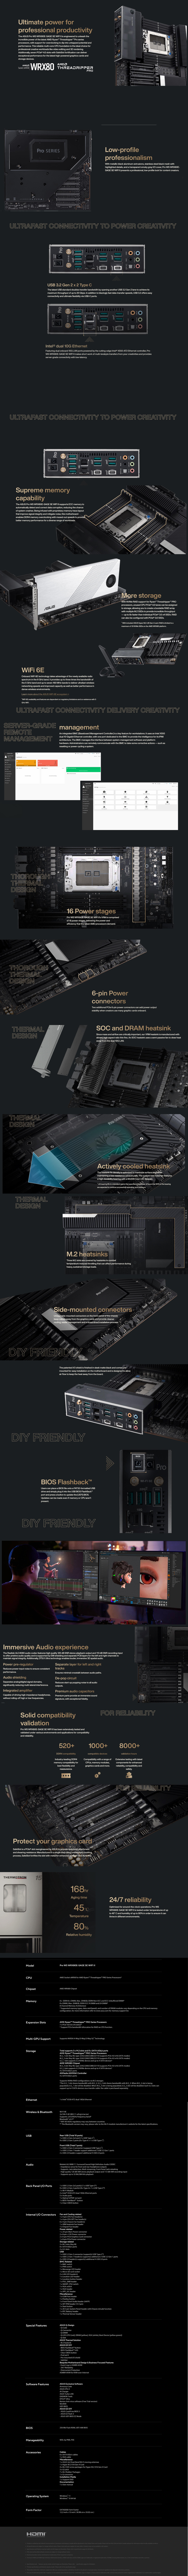 A large marketing image providing additional information about the product ASUS Pro WS Sage SE WiFi II WRX80 eATX Workstation Motherboard - Additional alt info not provided